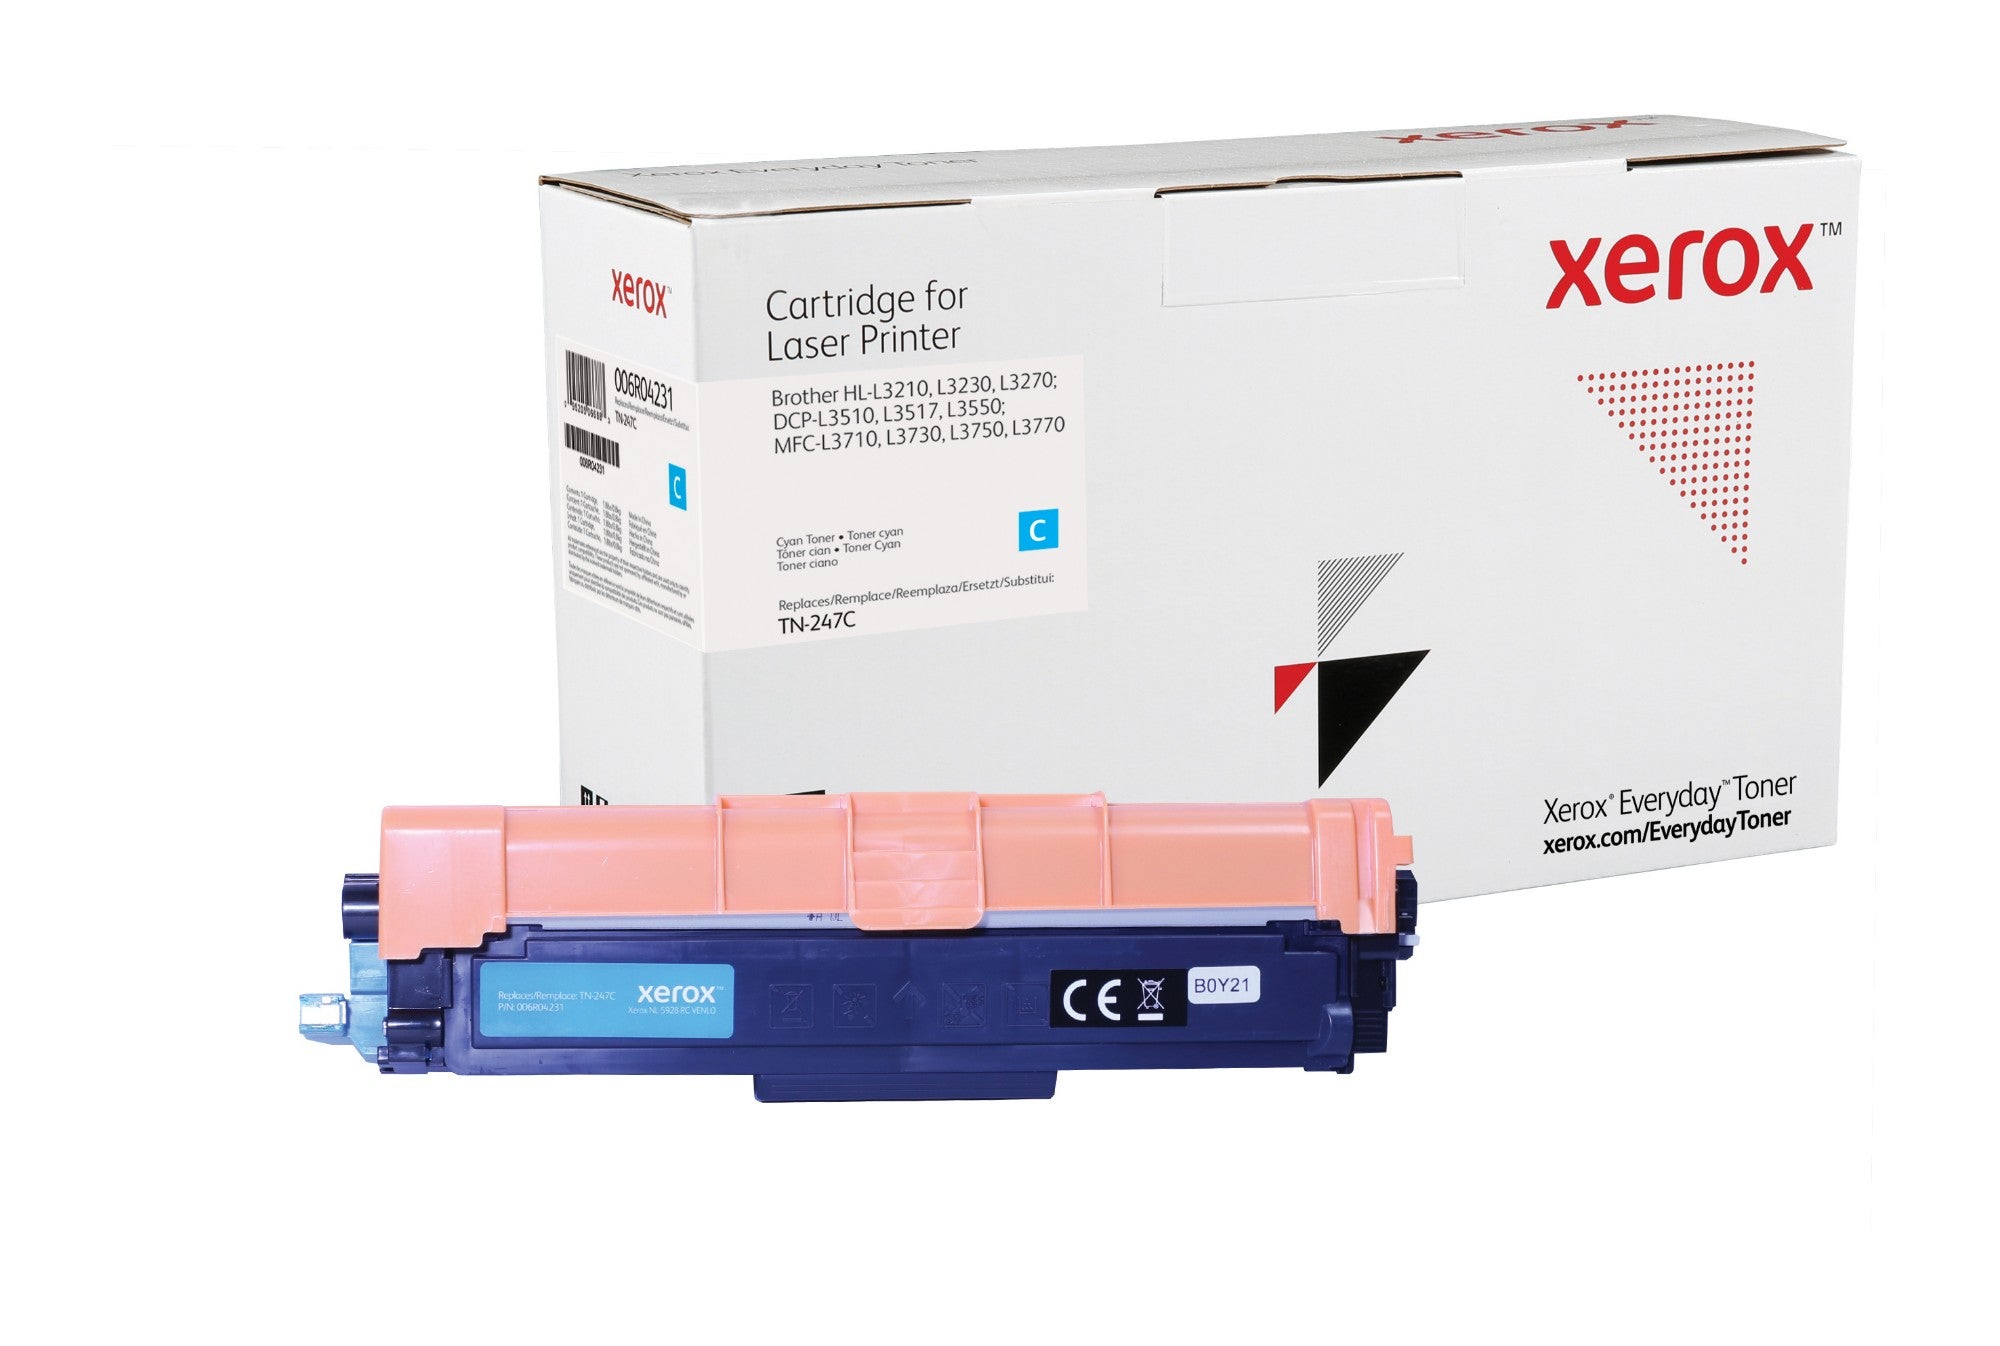 Xerox 006R04231 Toner-kit cyan, 2.3K pages (replaces Brother TN247C) for Brother HL-L 3210